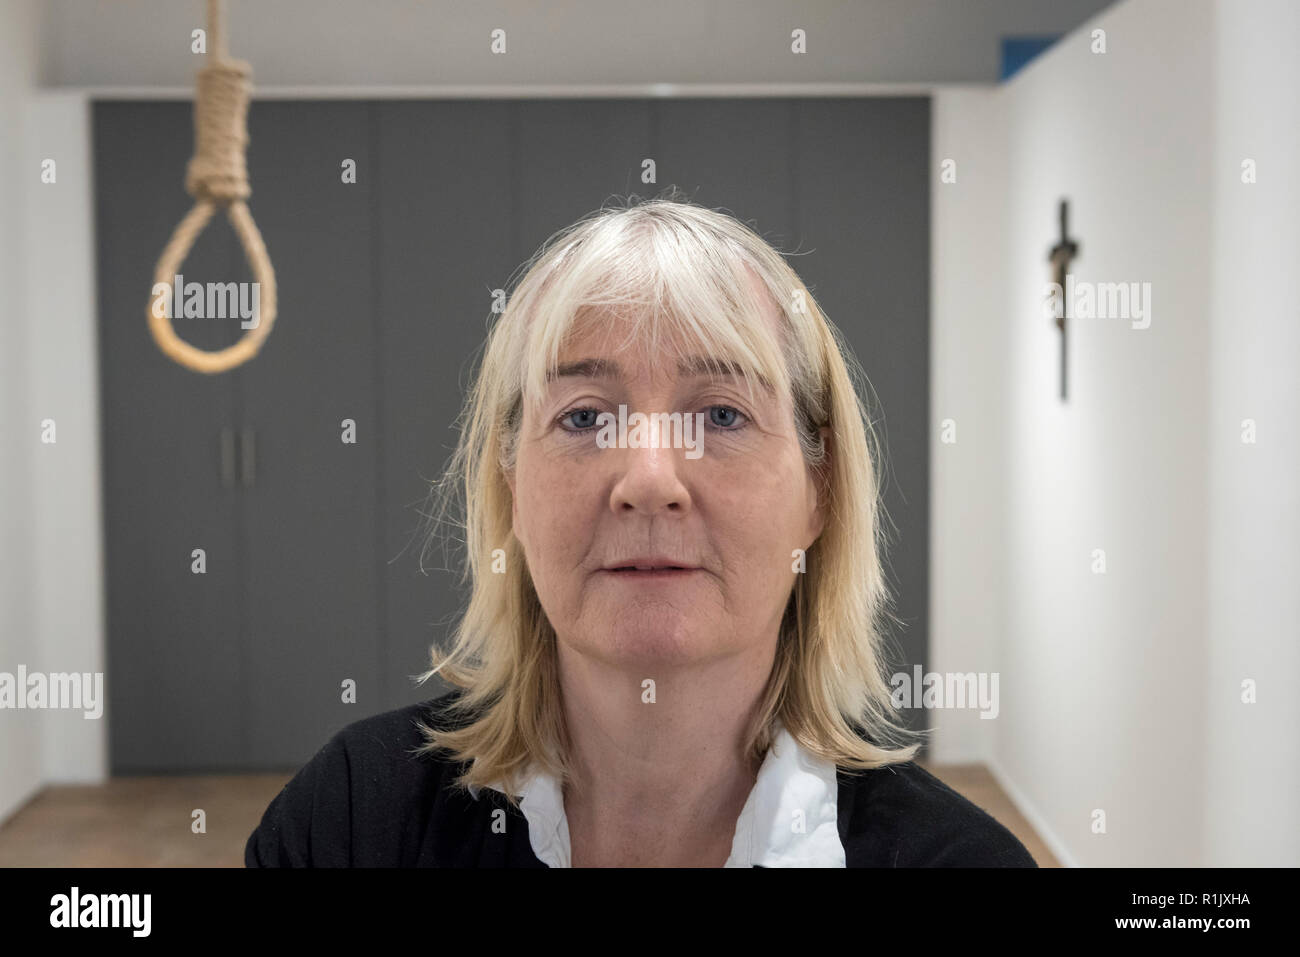 London, UK.  13 November 2018. Artist Christina Reihill poses with a hangman's noose.  Preview of 'Glad I Did It', a new work by Irish artist Christina Reihill at Bermondsey Project Space.  The interactive artwork looks at the life and death of Ruth Ellis, the last woman to be hanged in Britain, after she shot her lover, racing driver, David Blakely in 1955.  On display are the artist's interpretation of Ruth Ellis' prison cell, including furniture and props, the hanging room together with a video display of the artist in conversation. Credit: Stephen Chung/Alamy Live News Stock Photo